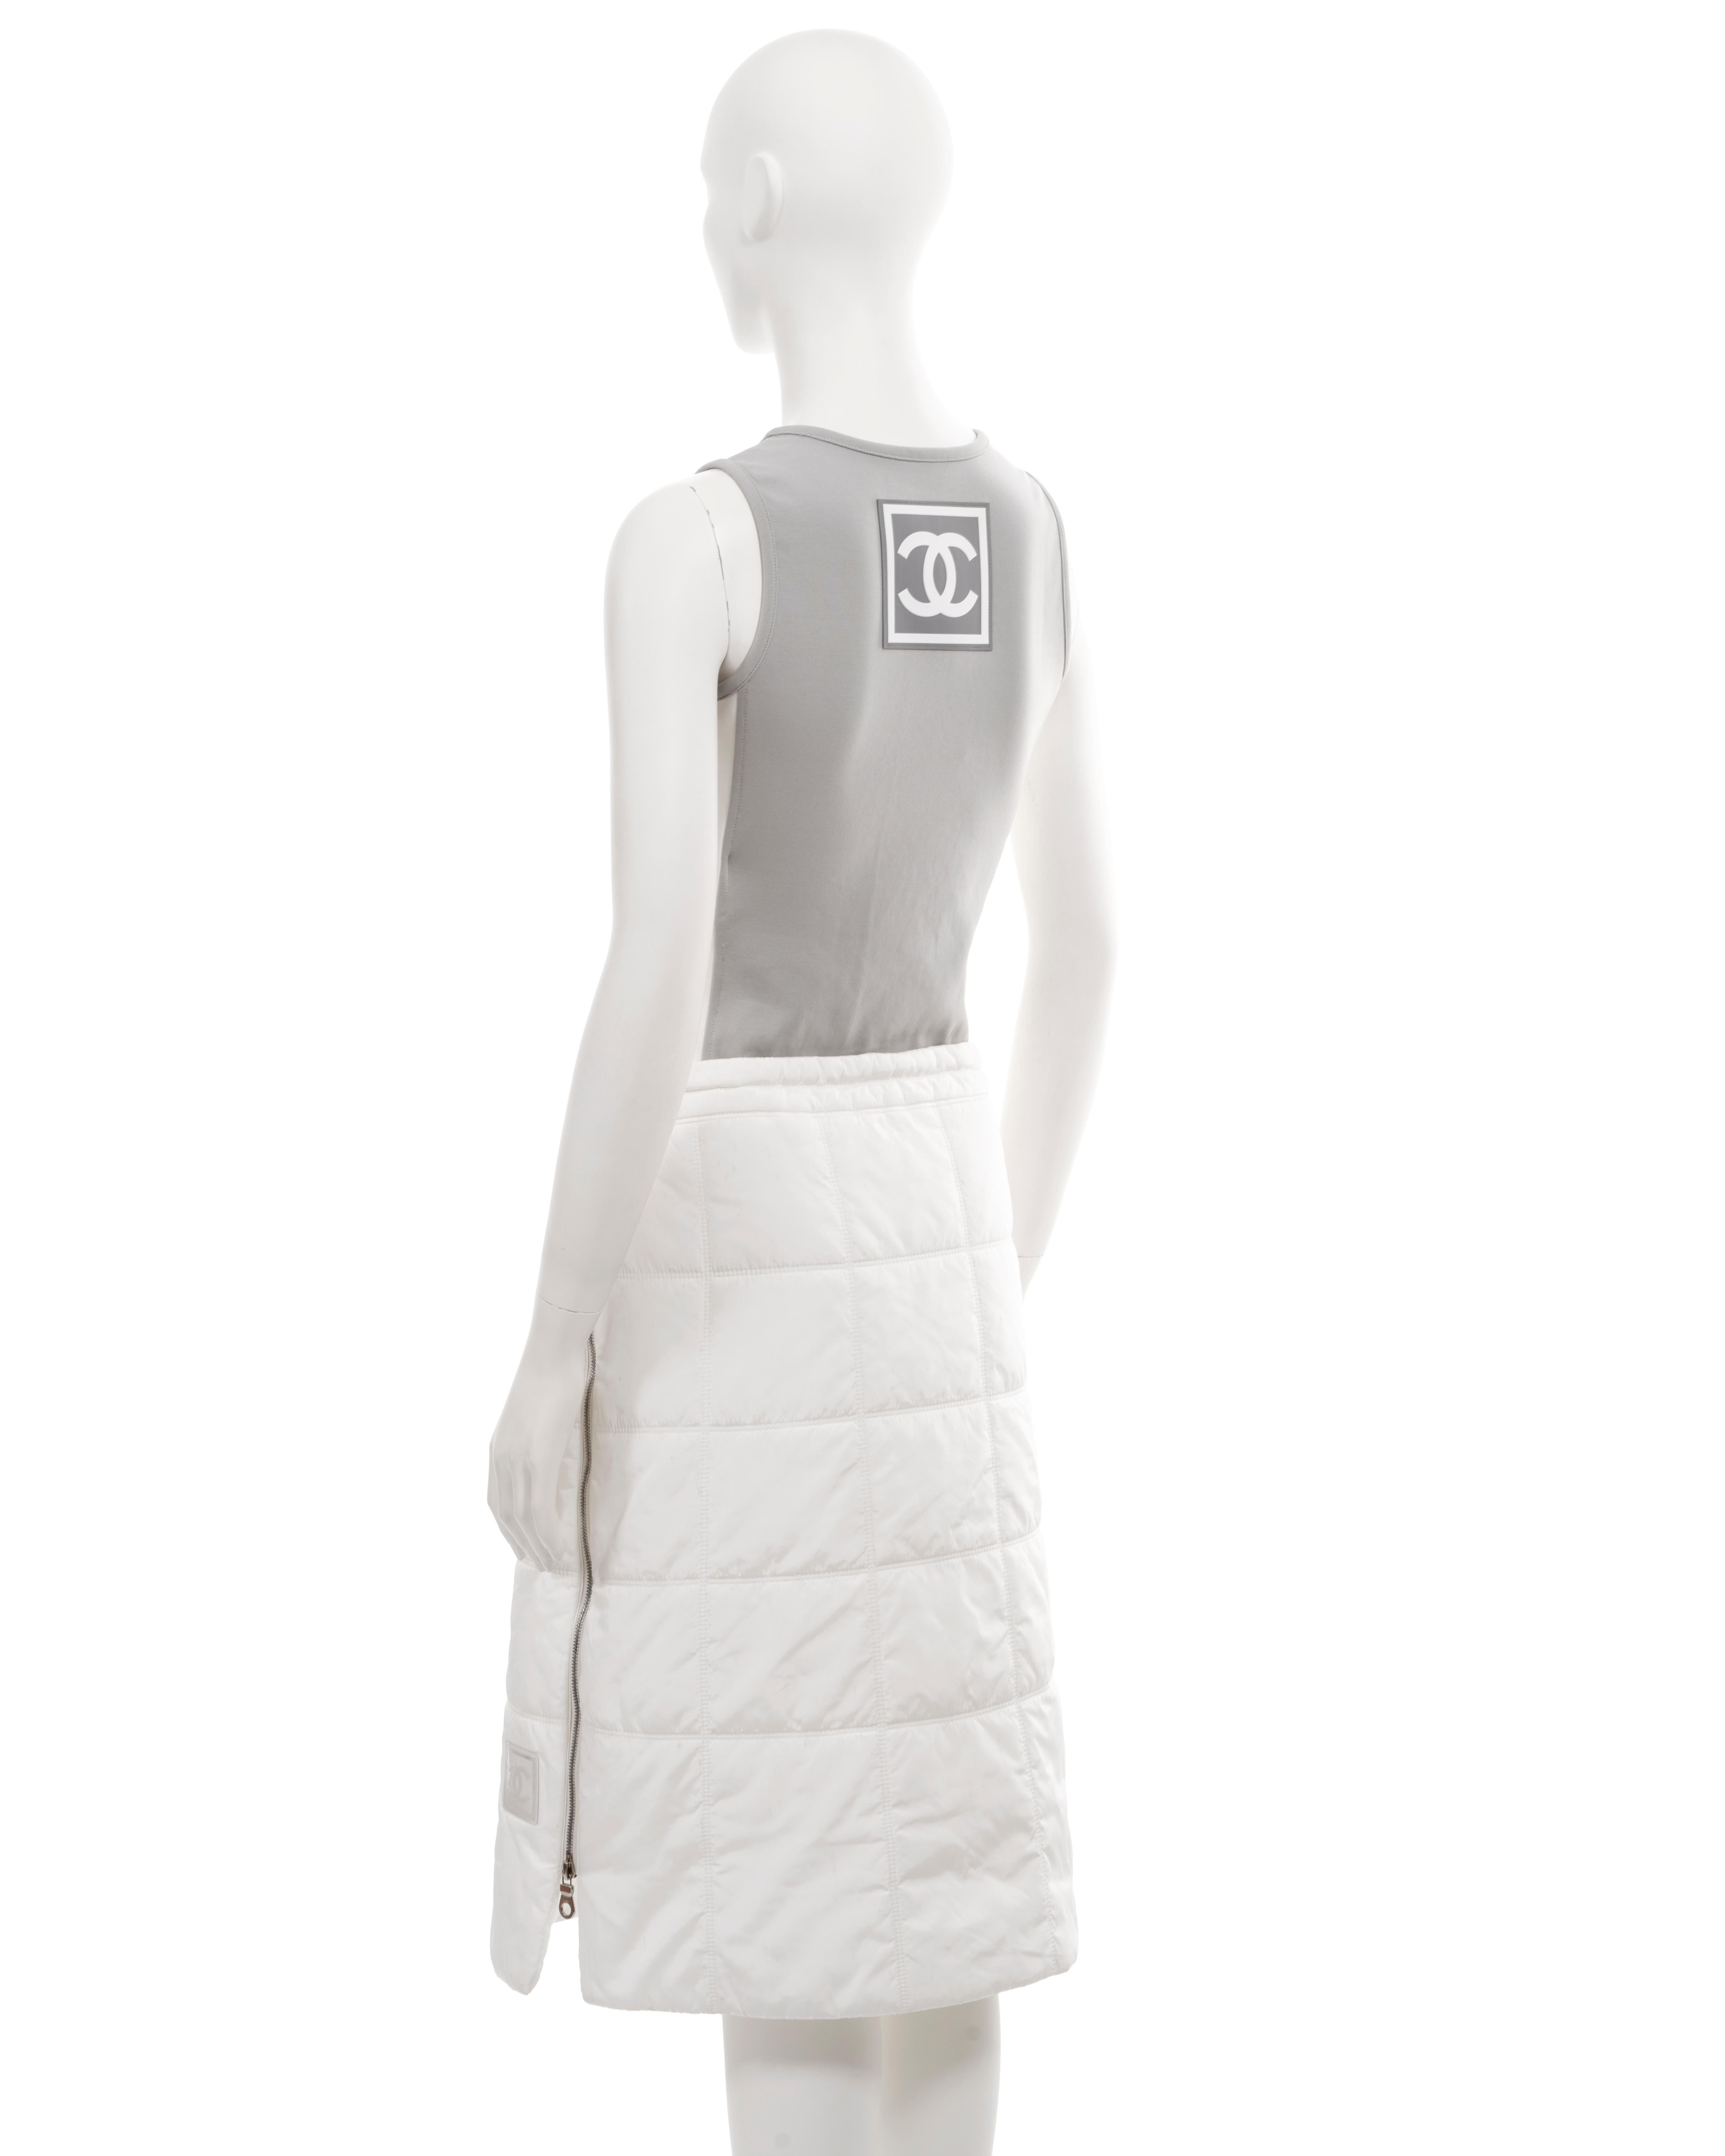 Chanel by Karl Lagerfeld white quilted nylon skirt and sports vest, ss 2001 For Sale 4